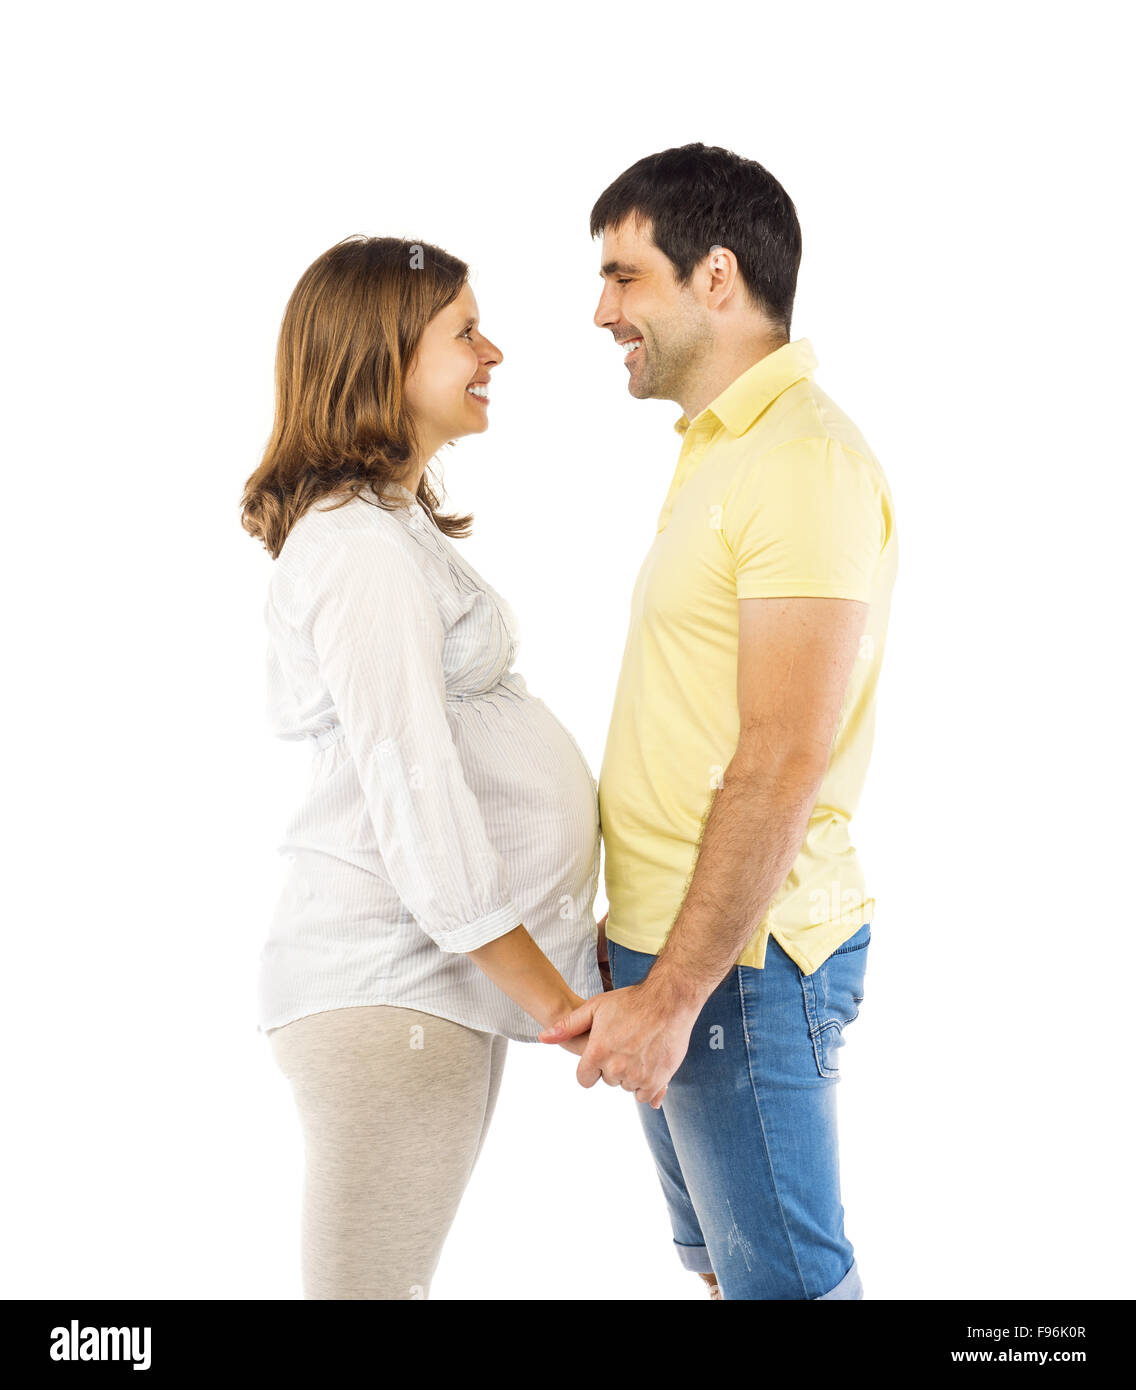 Beautiful young happy smiling pregnant couple, isolated on white background Stock Photo